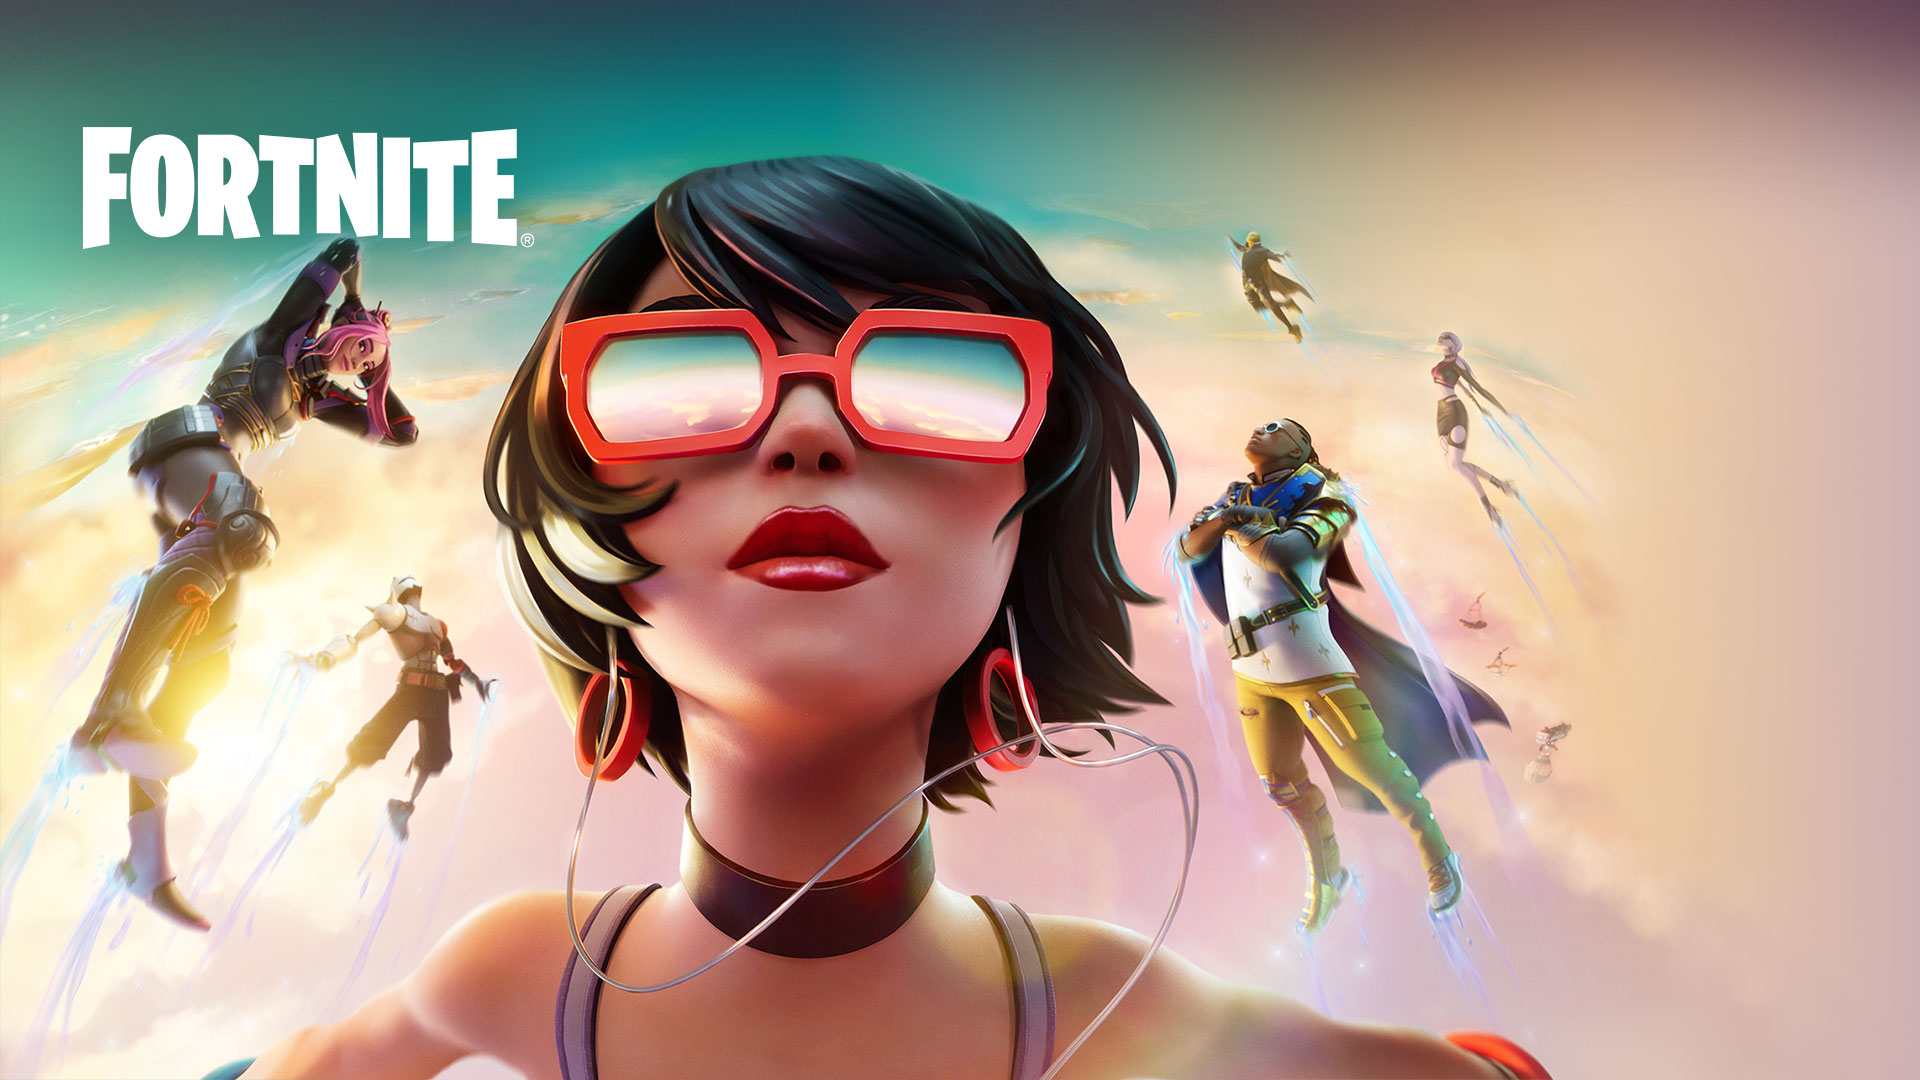 Fortnite, A girl in red sunglasses floats in the clouds with other characters against a pastel-coloured sky.